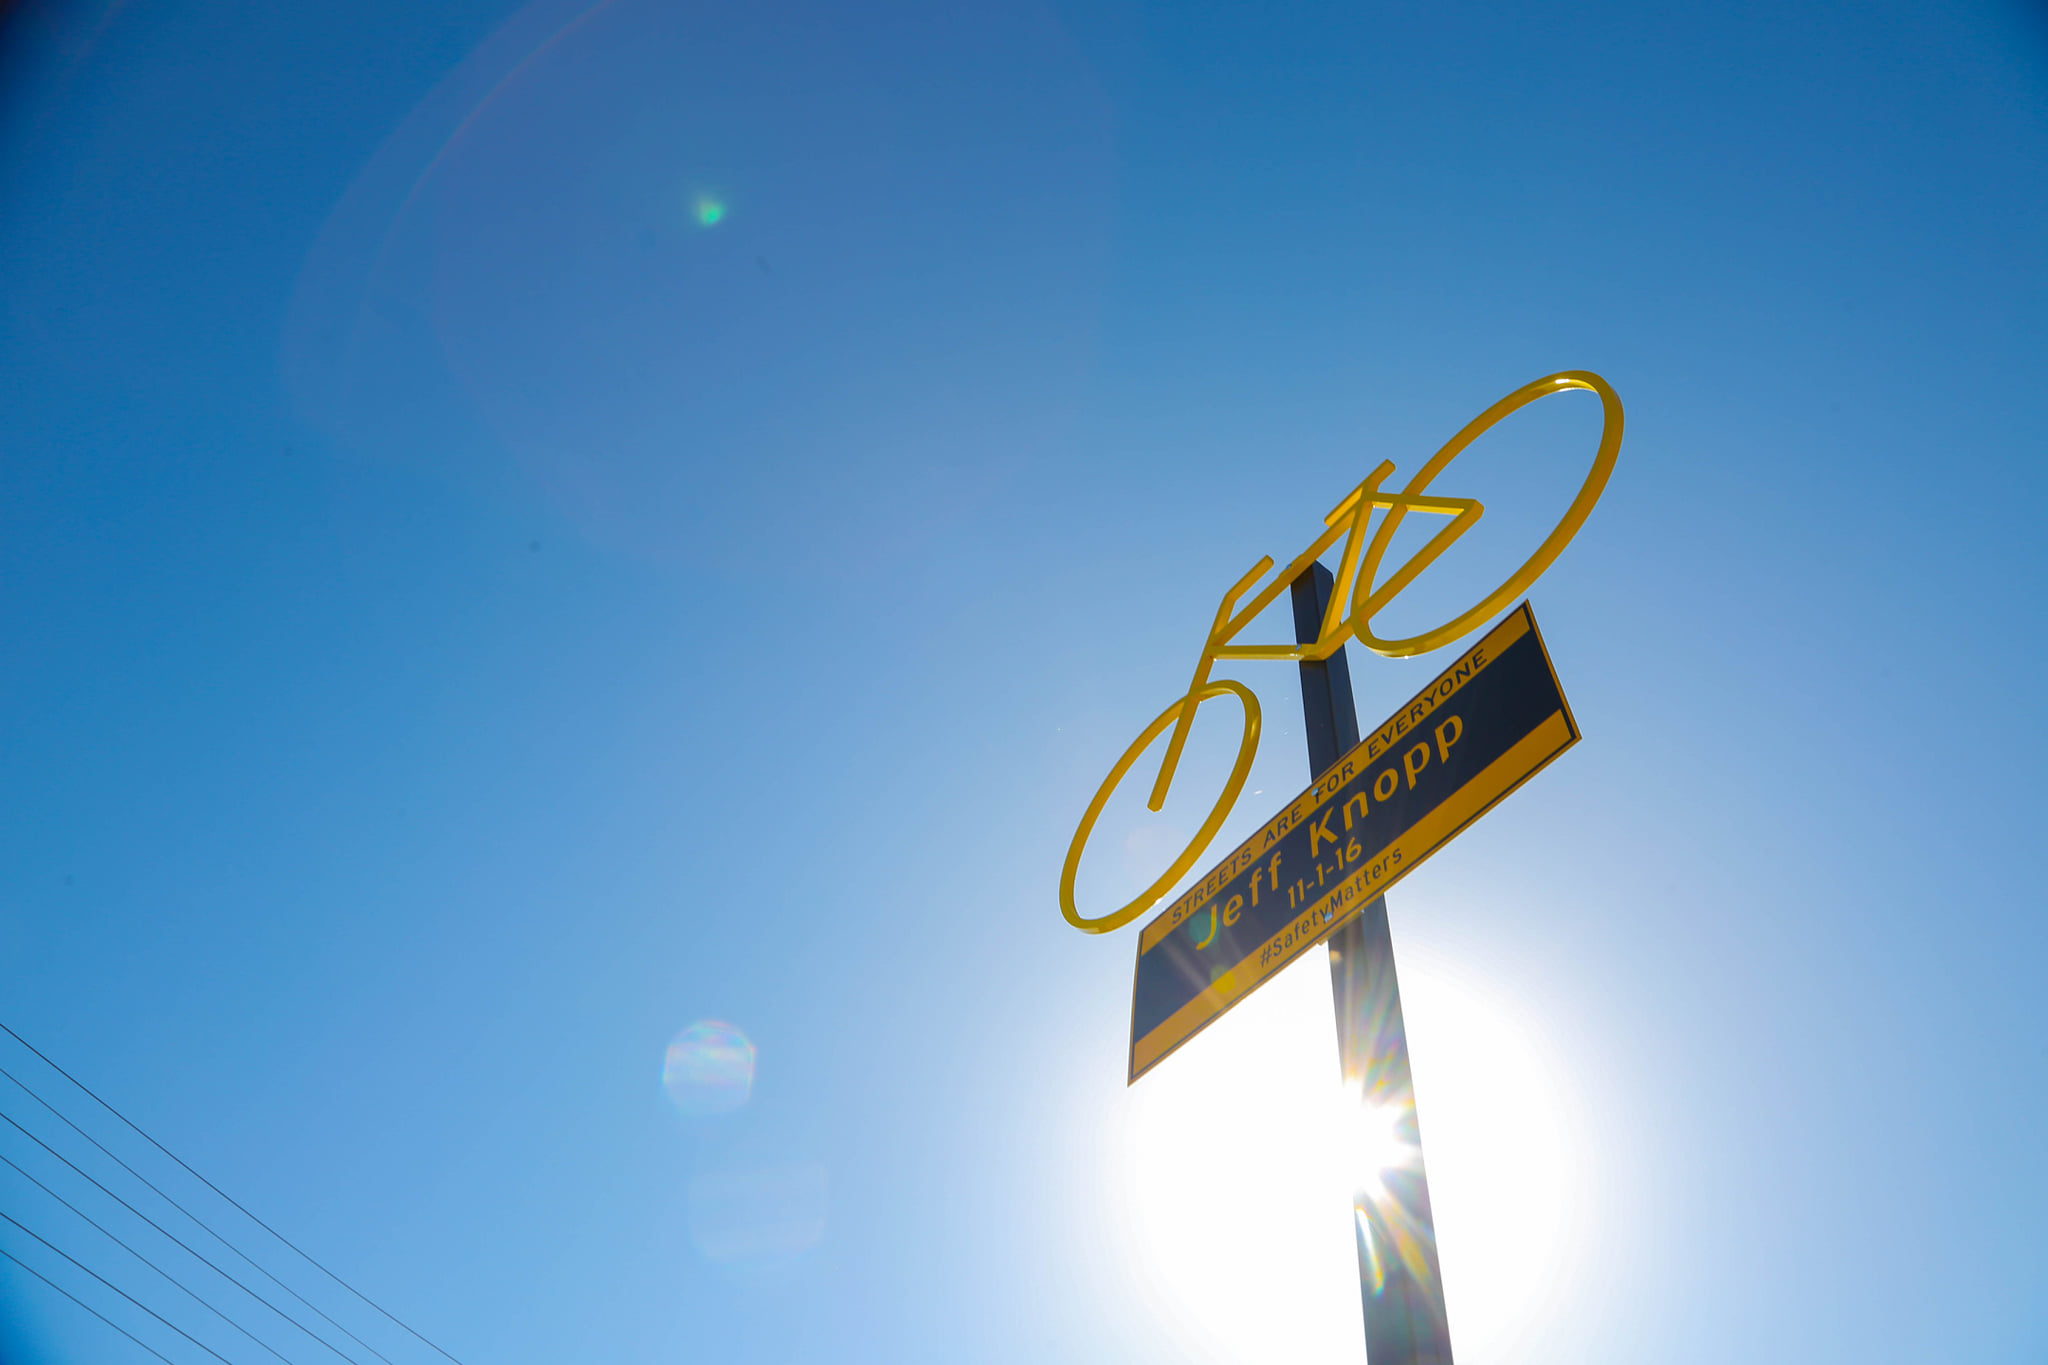 In Jeff’s Memory, a Yellow Bike Memorial was Unveiled